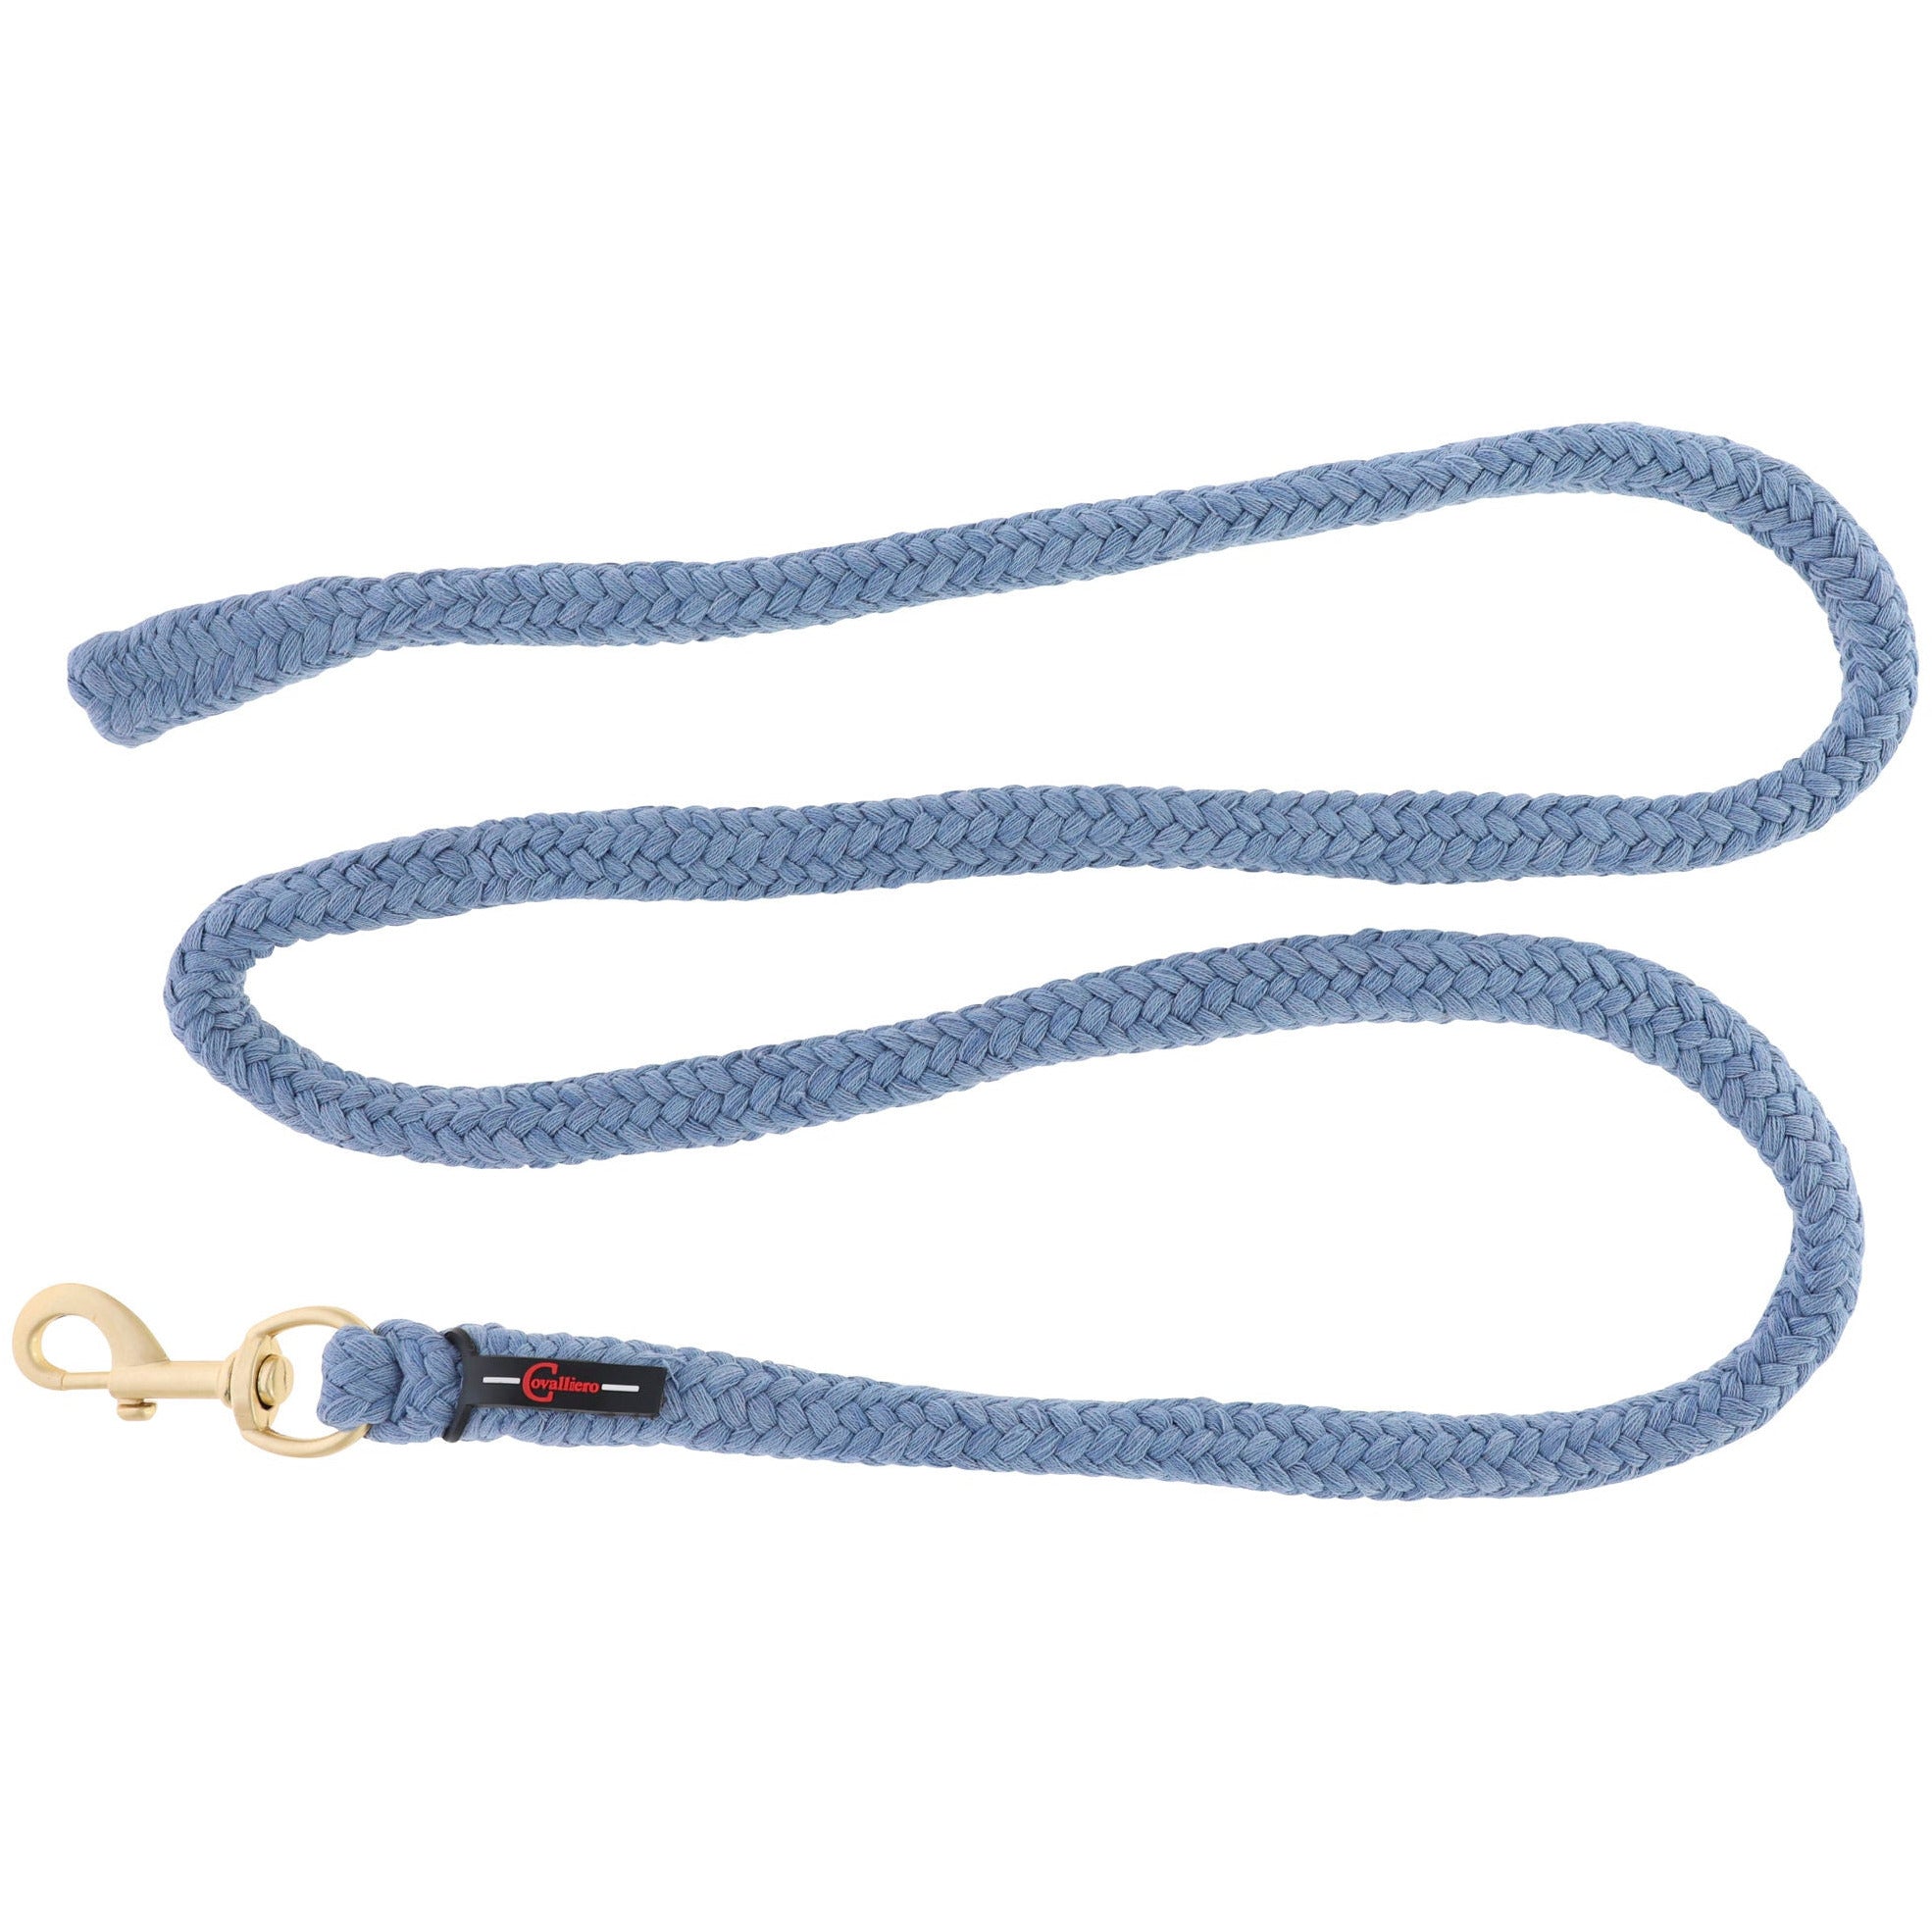 Covalliero AW22 Lead Rope